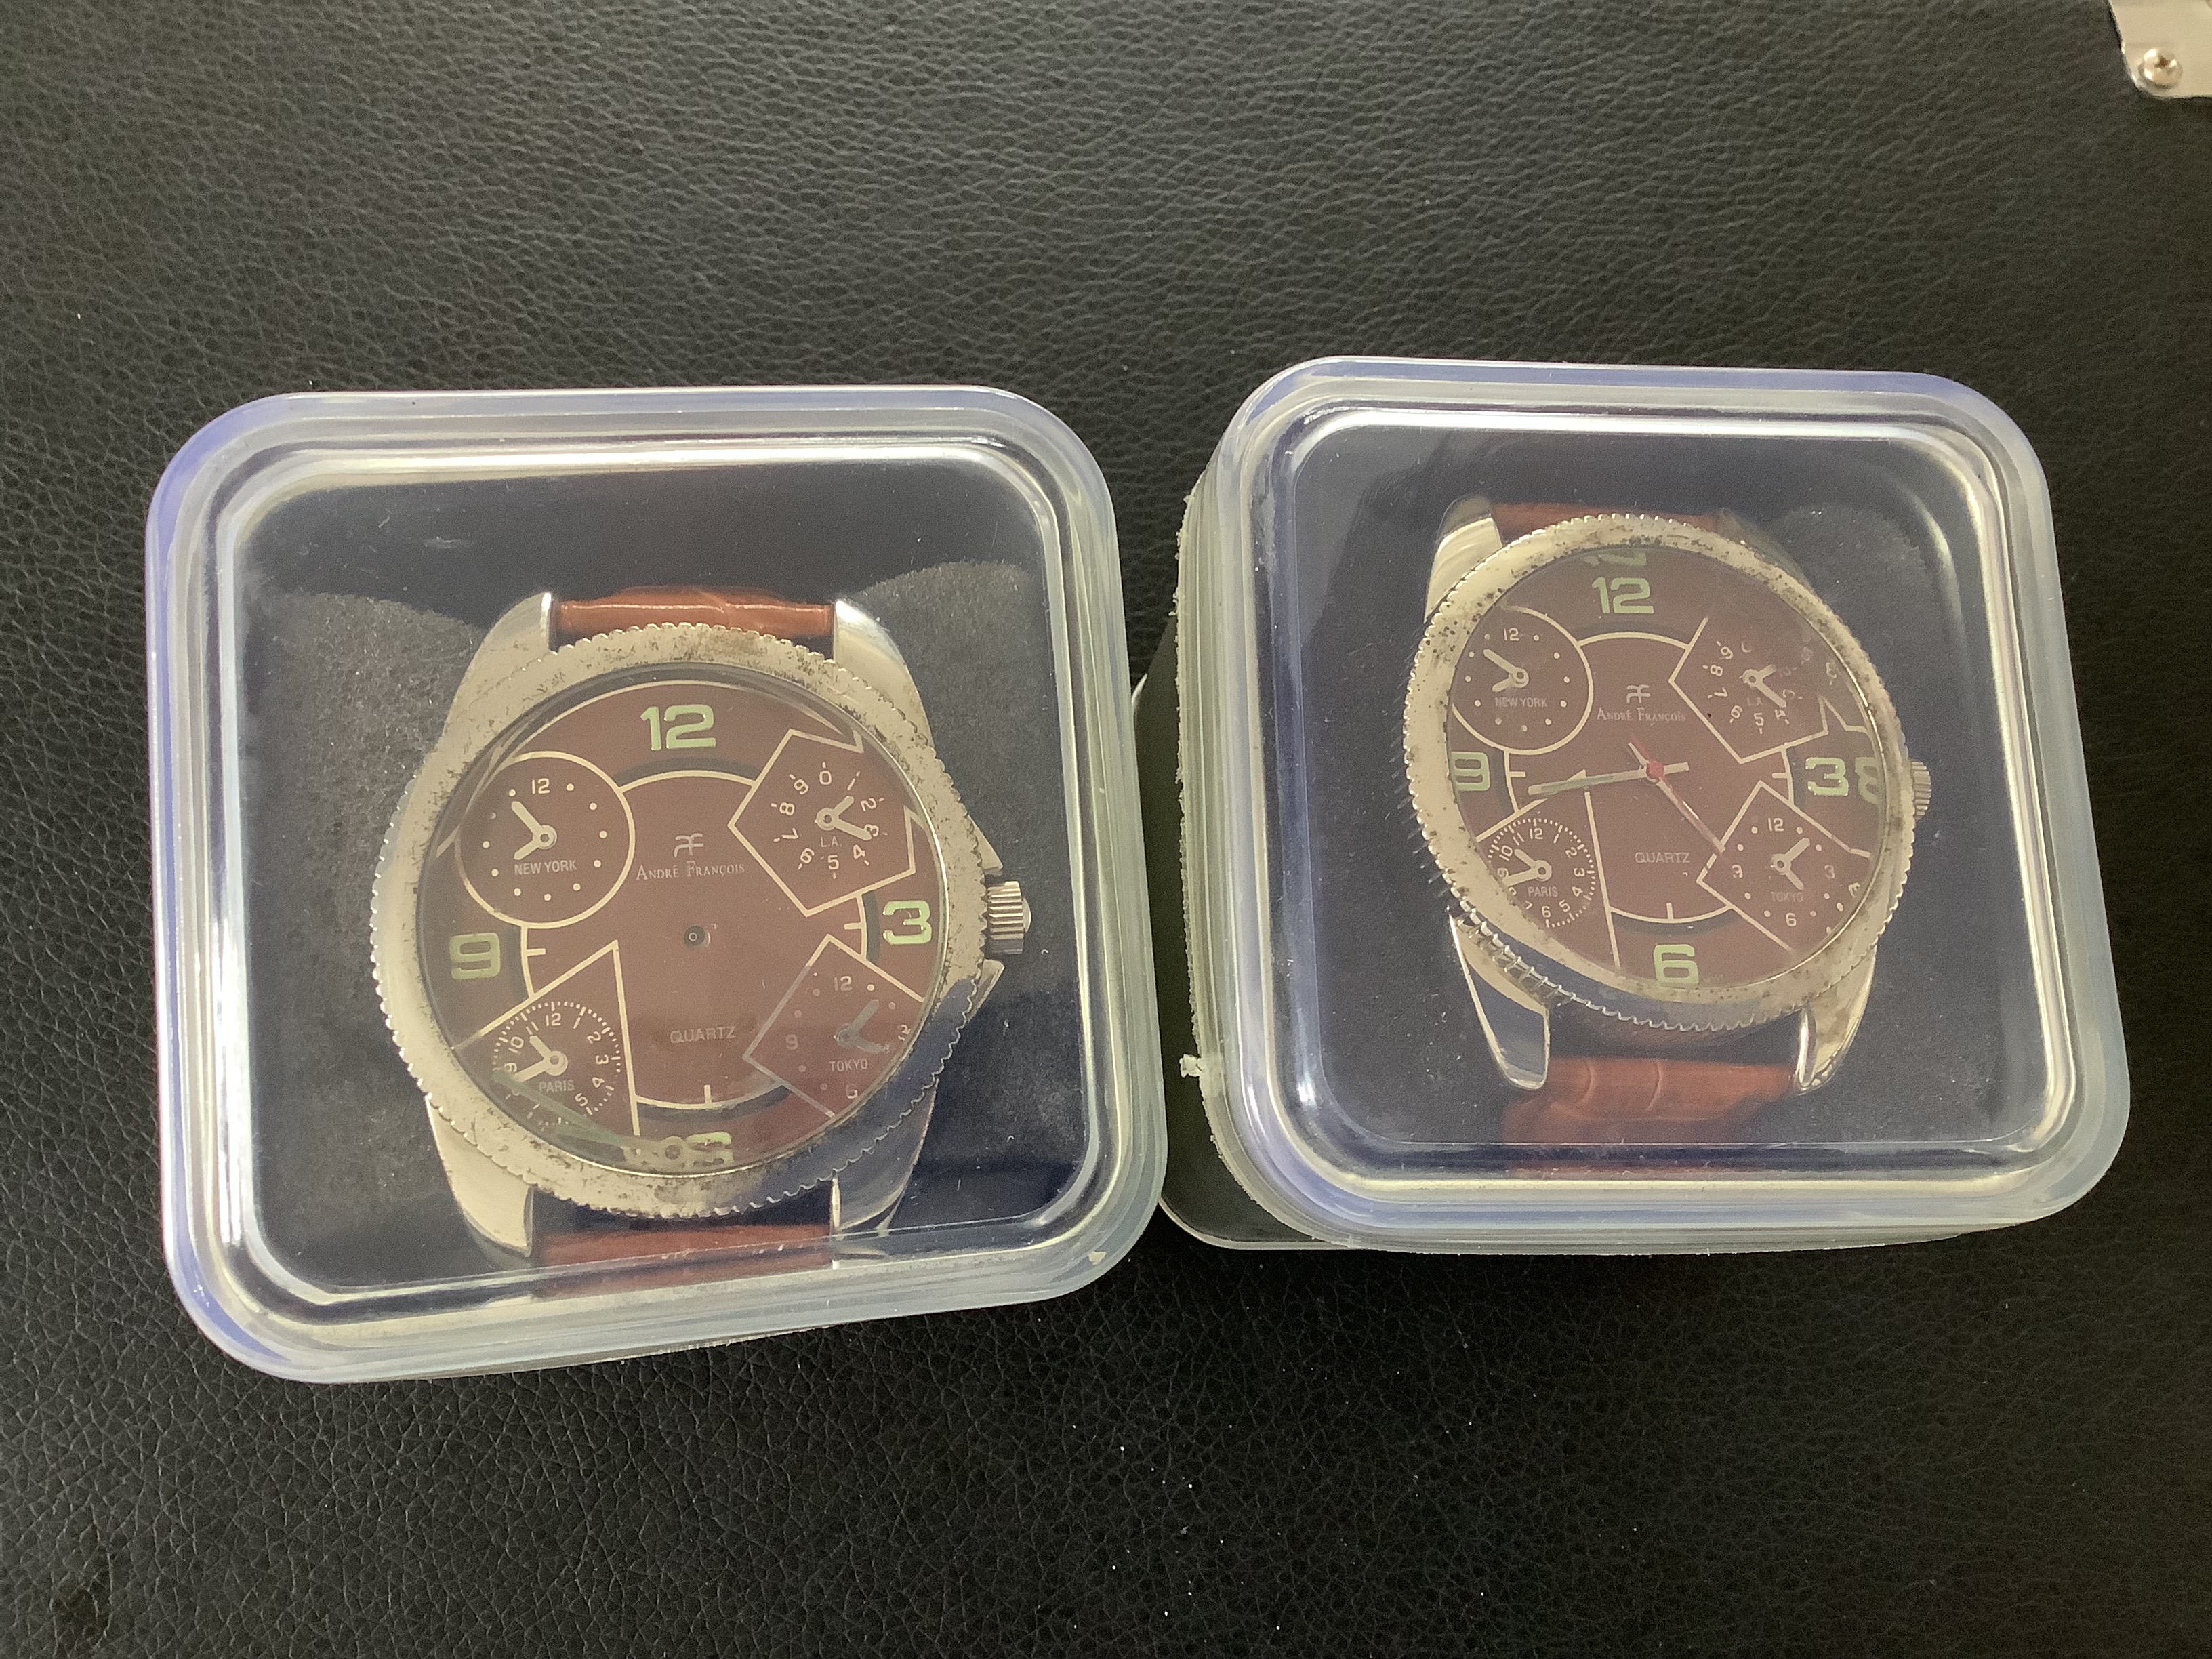 A Pair of Andre Francois Wristwatches (GS 160) Here are 2 Andre Francois Wristwatches. They - Image 5 of 6